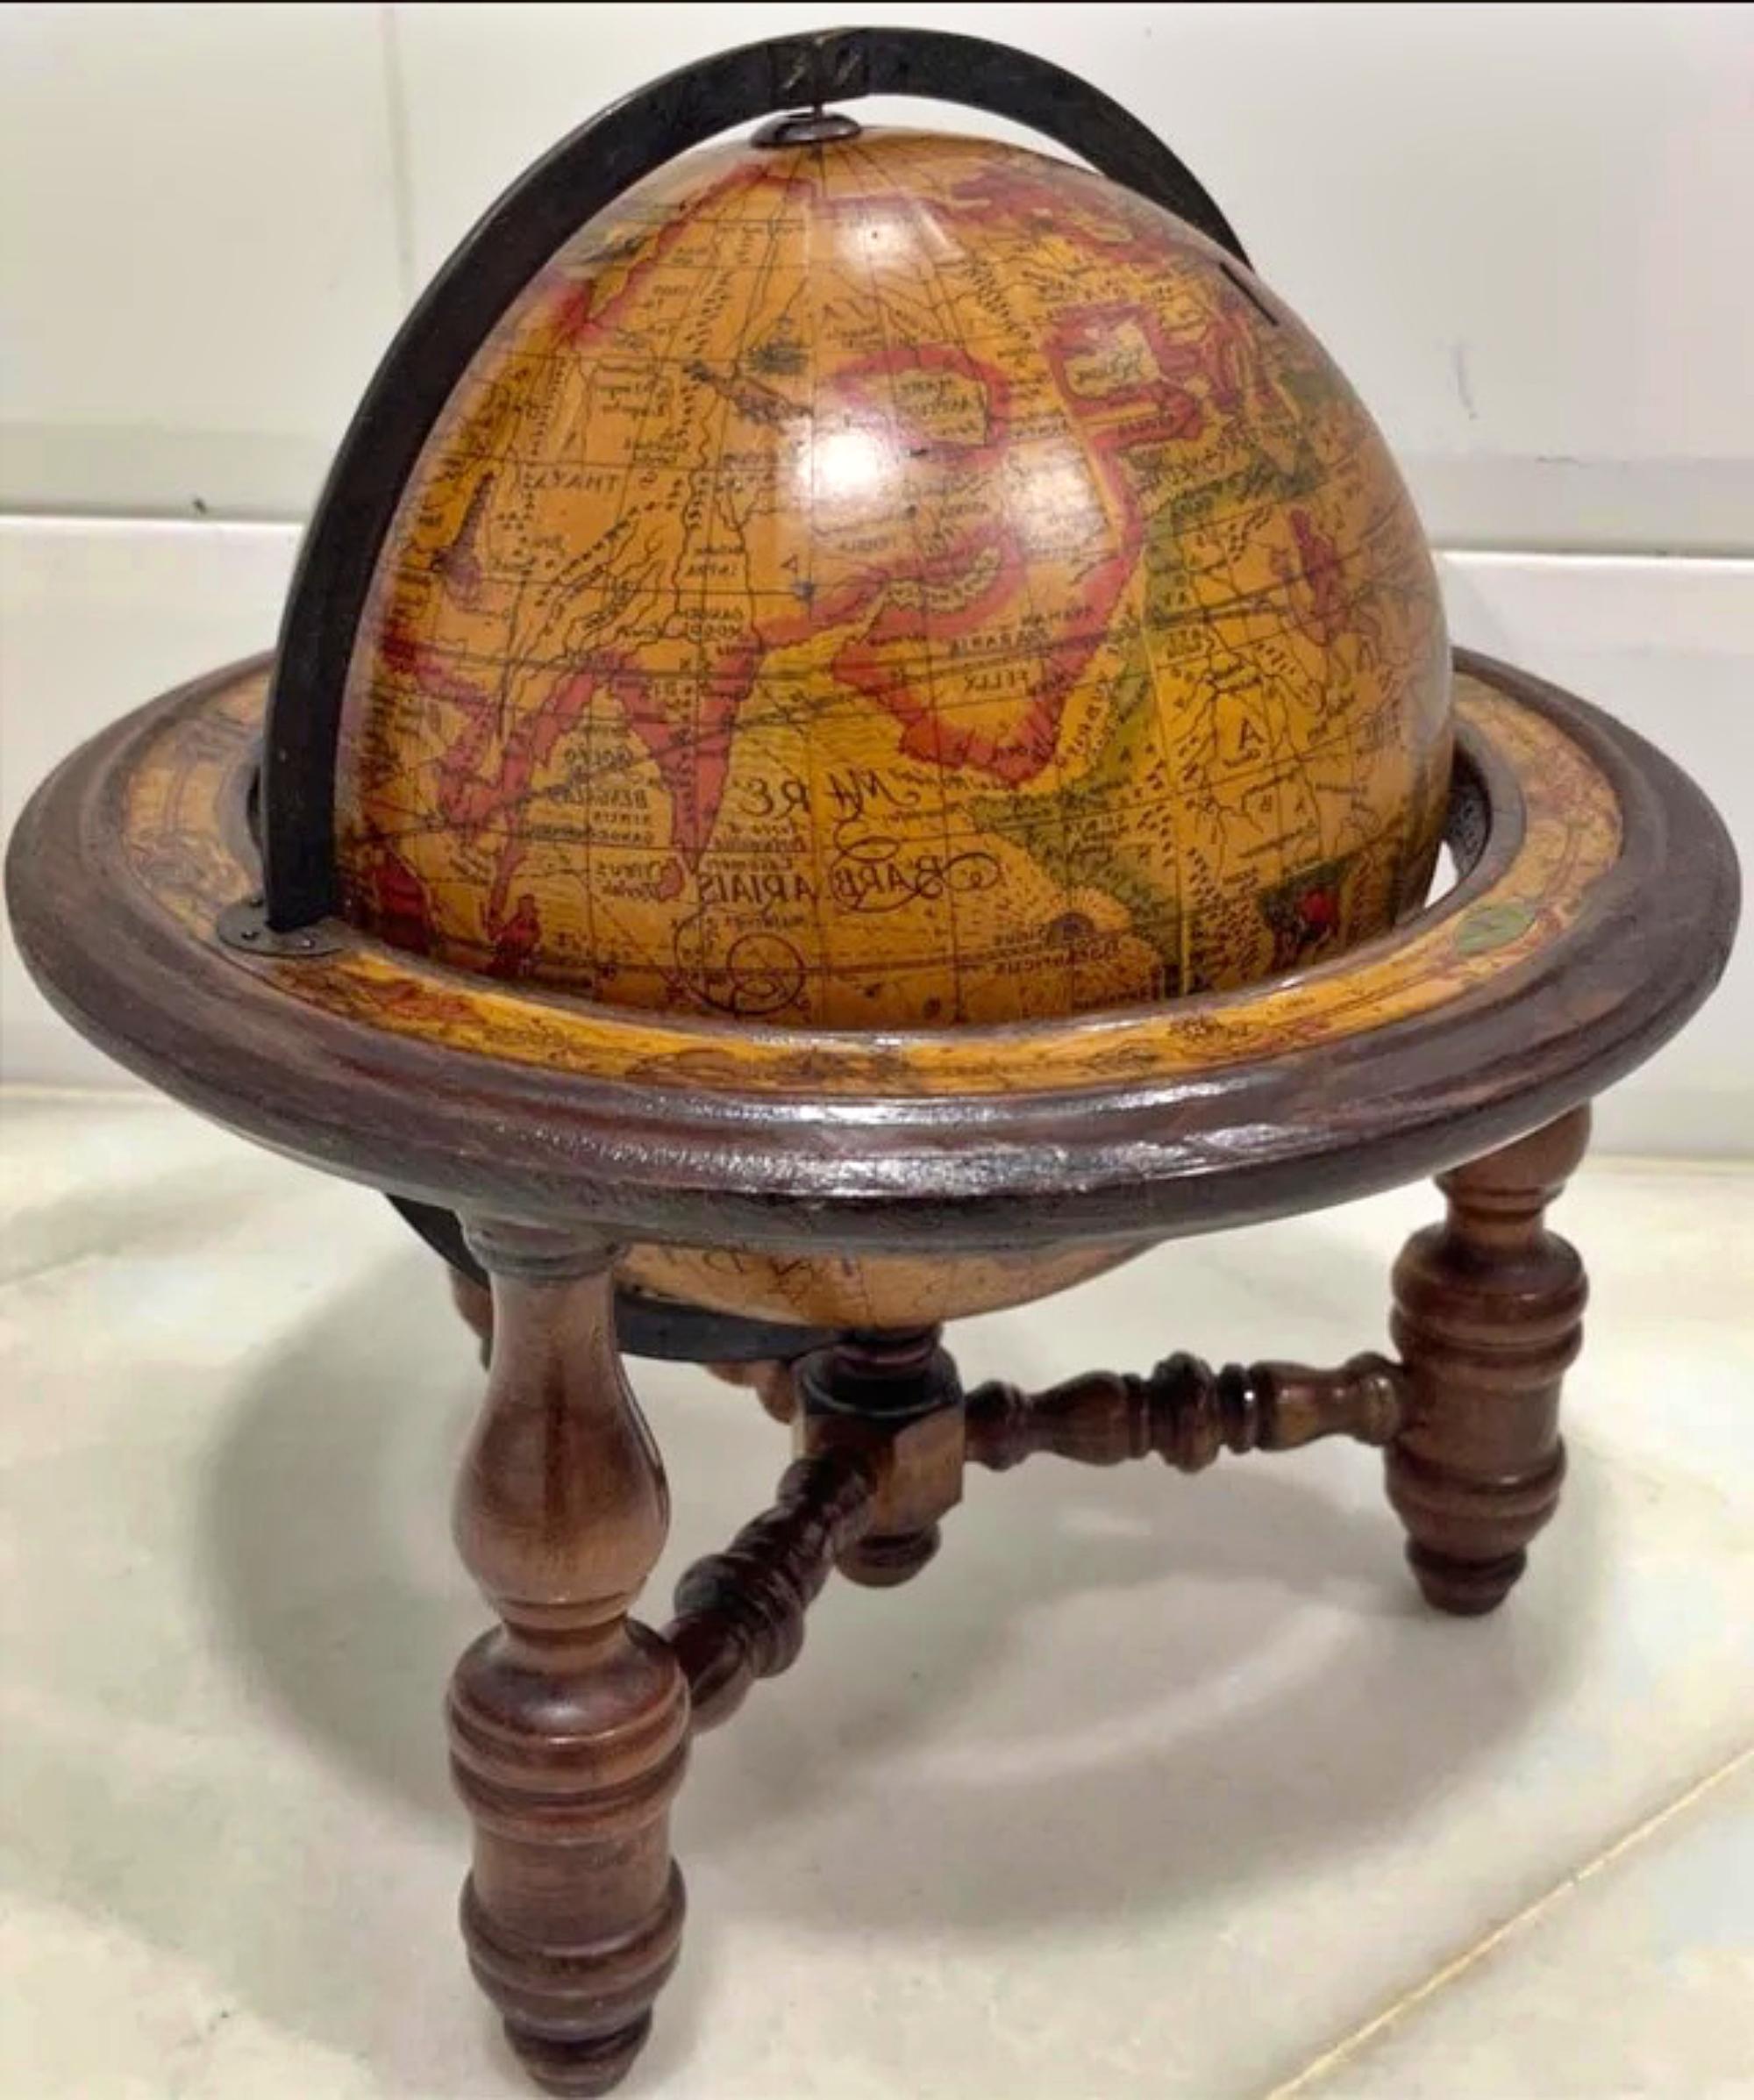 Terrestrial globe early 20th century.
Material: wood.
Measures: 30cm tall.
27 diameter.
Good condition.